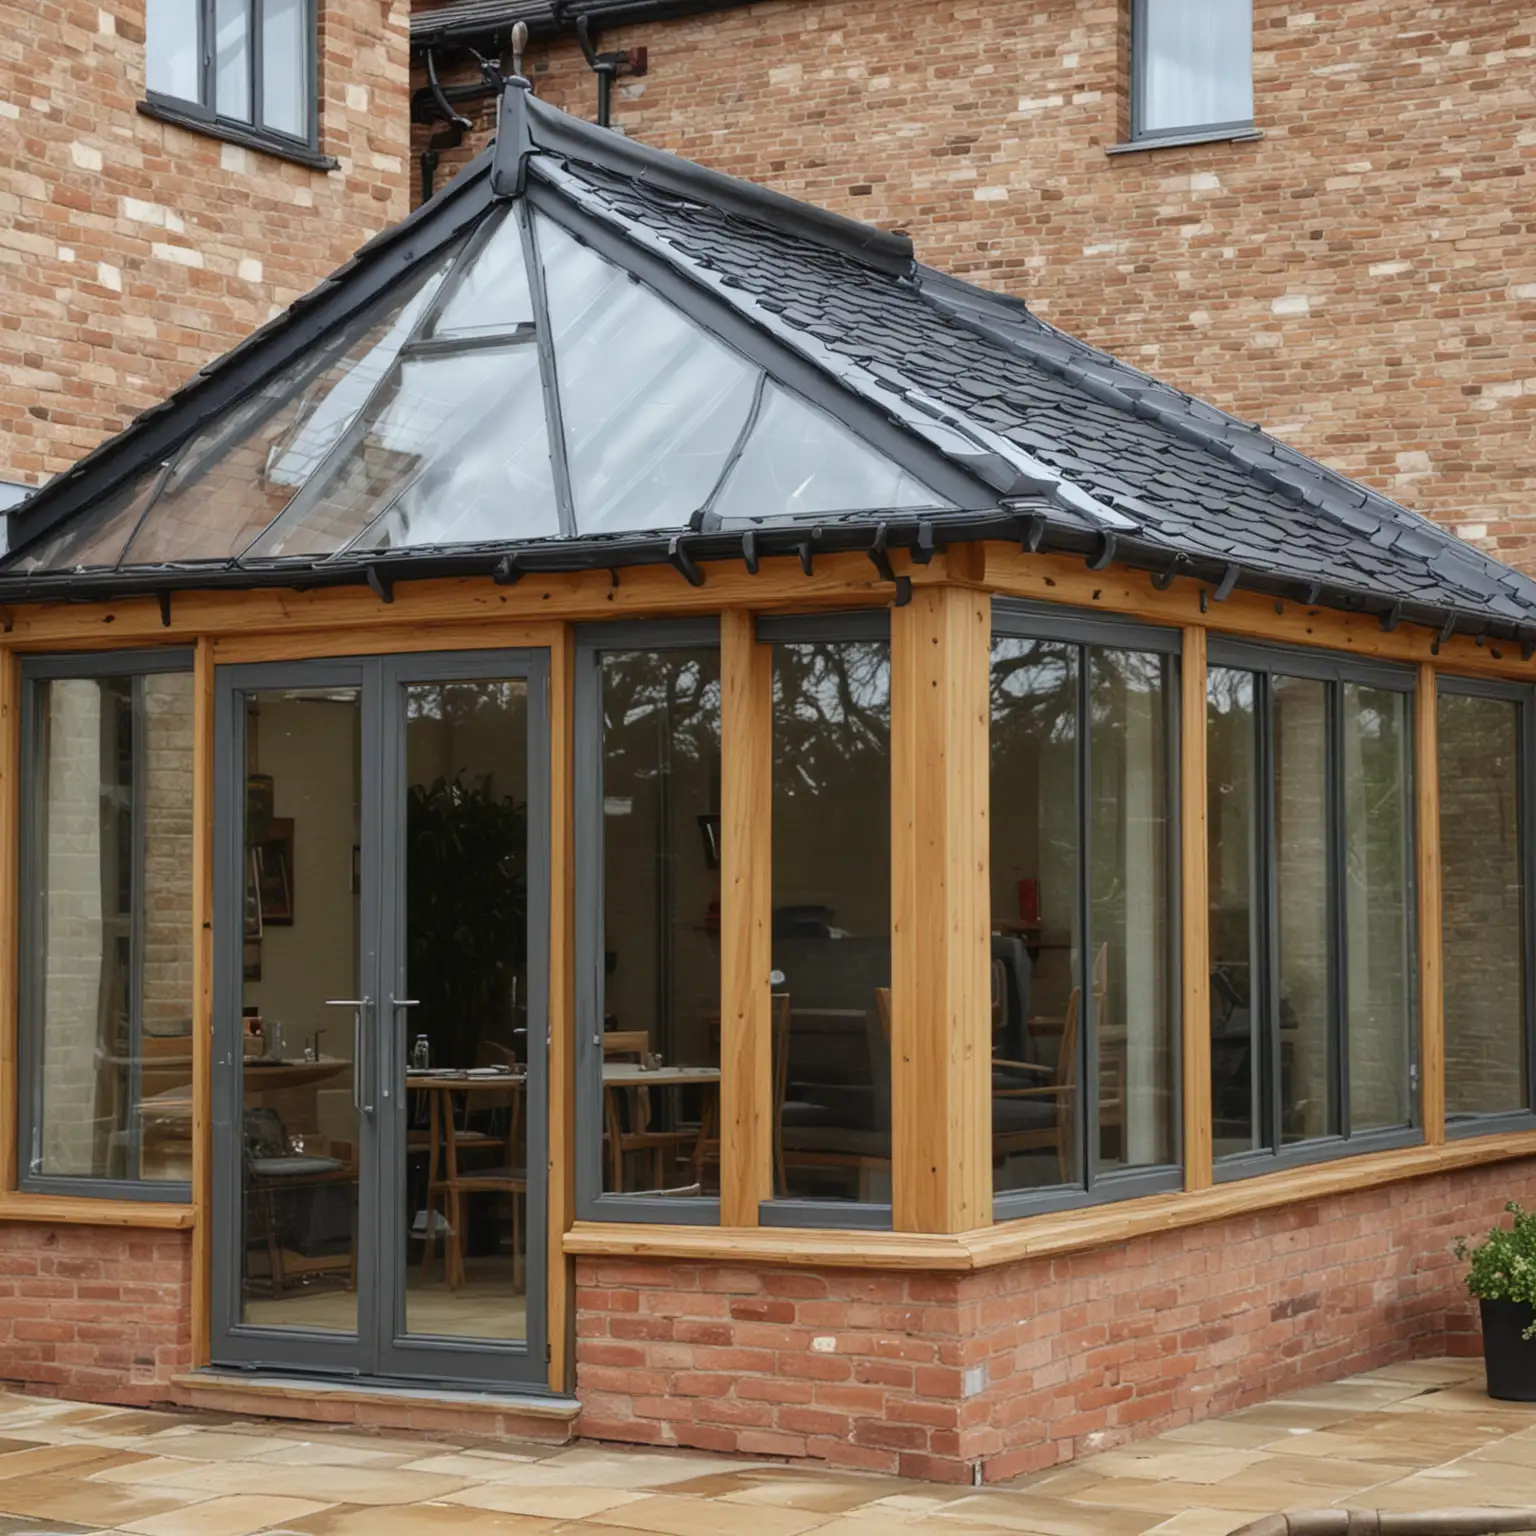 Natural Slate Roof Glulam Arch Conservatory